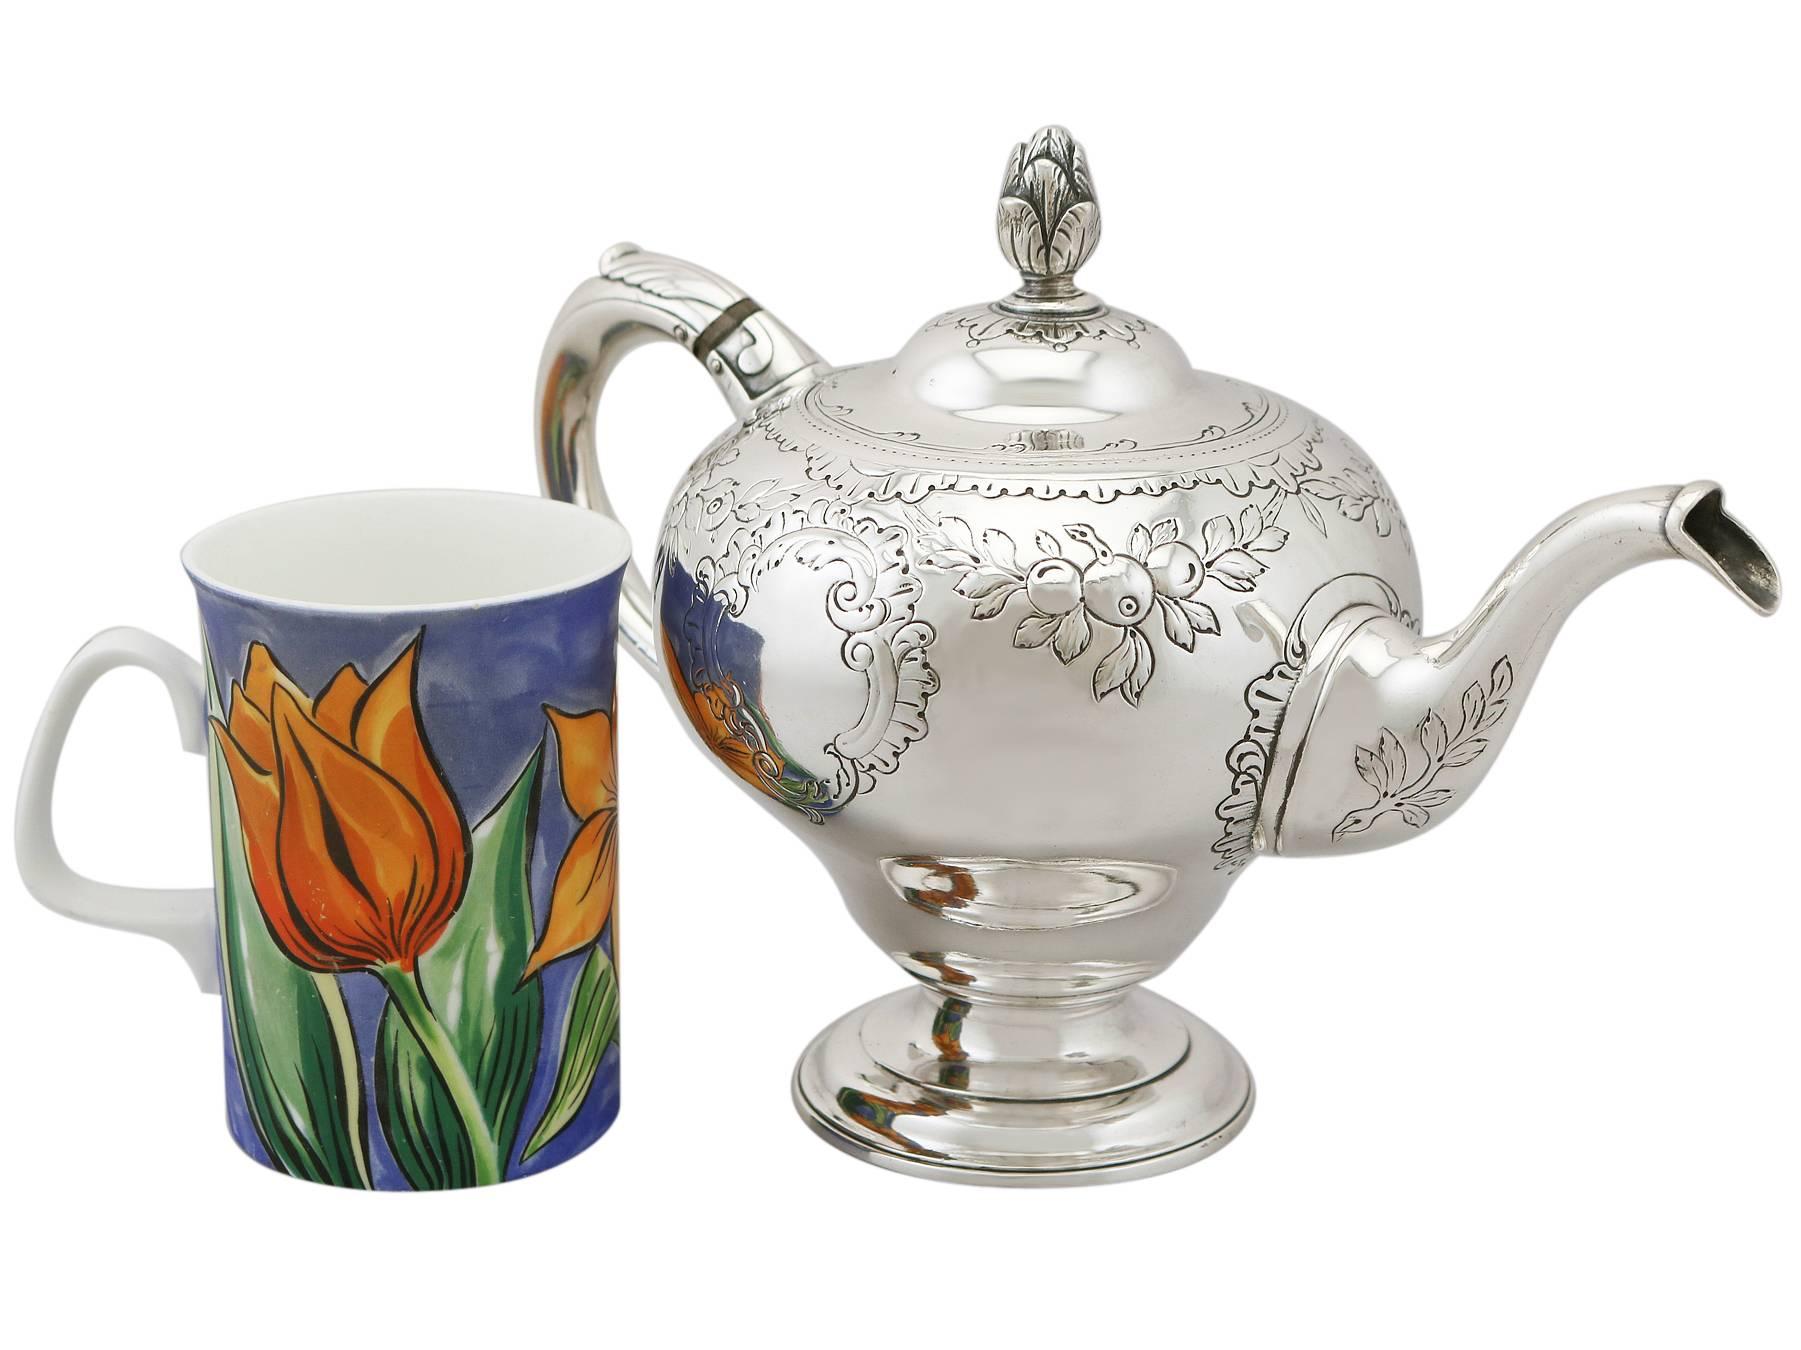 An exceptional, fine and impressive antique Georgian Scottish sterling silver teapot; an addition to our 18th century silver teaware collection.

This exceptional antique Georgian Scottish sterling silver teapot has an inverted pear shaped form